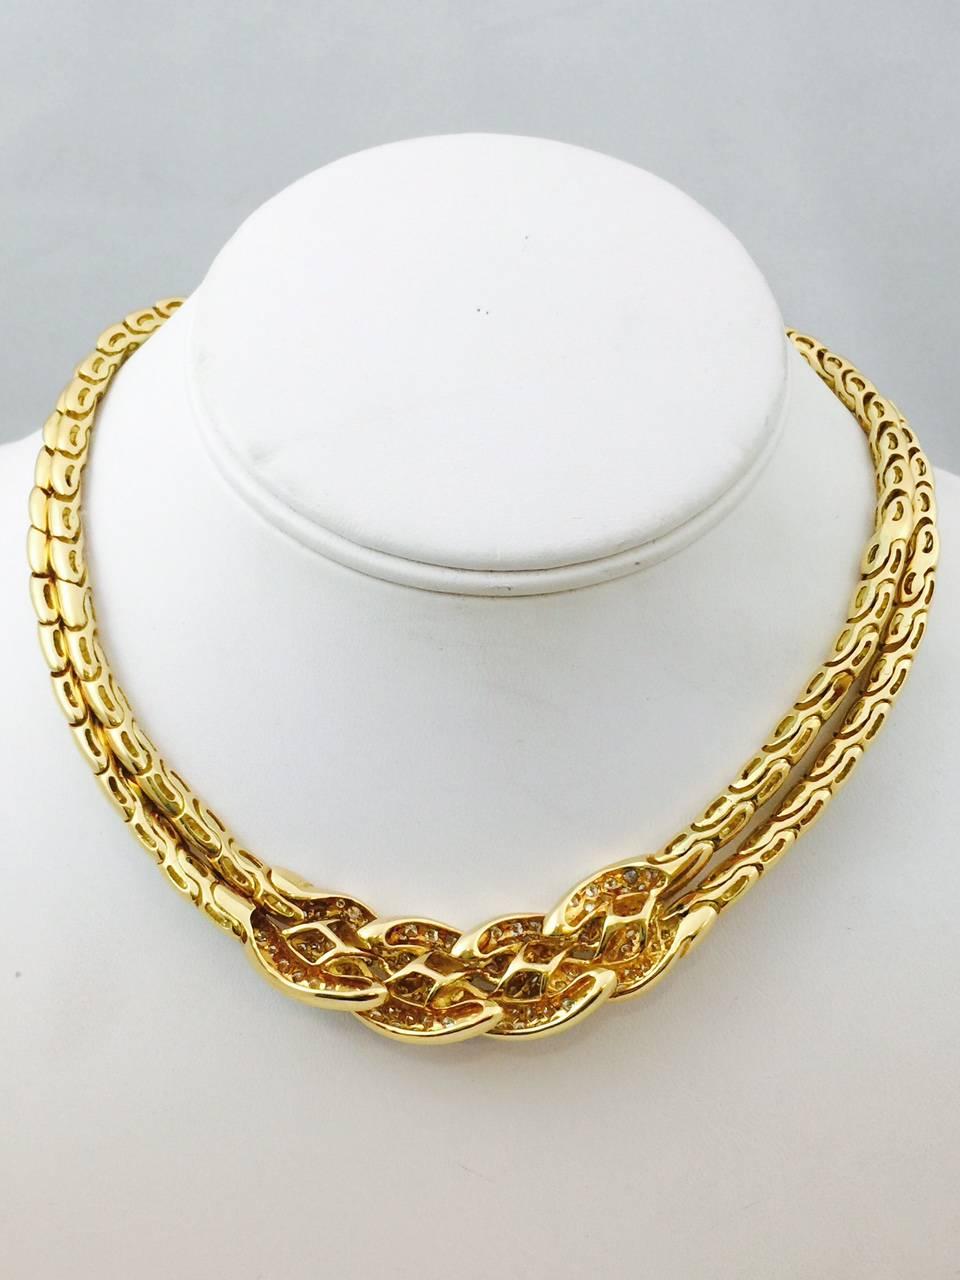 Contemporary Van Cleef & Arpels Diamond Gold Choker Necklace For Sale